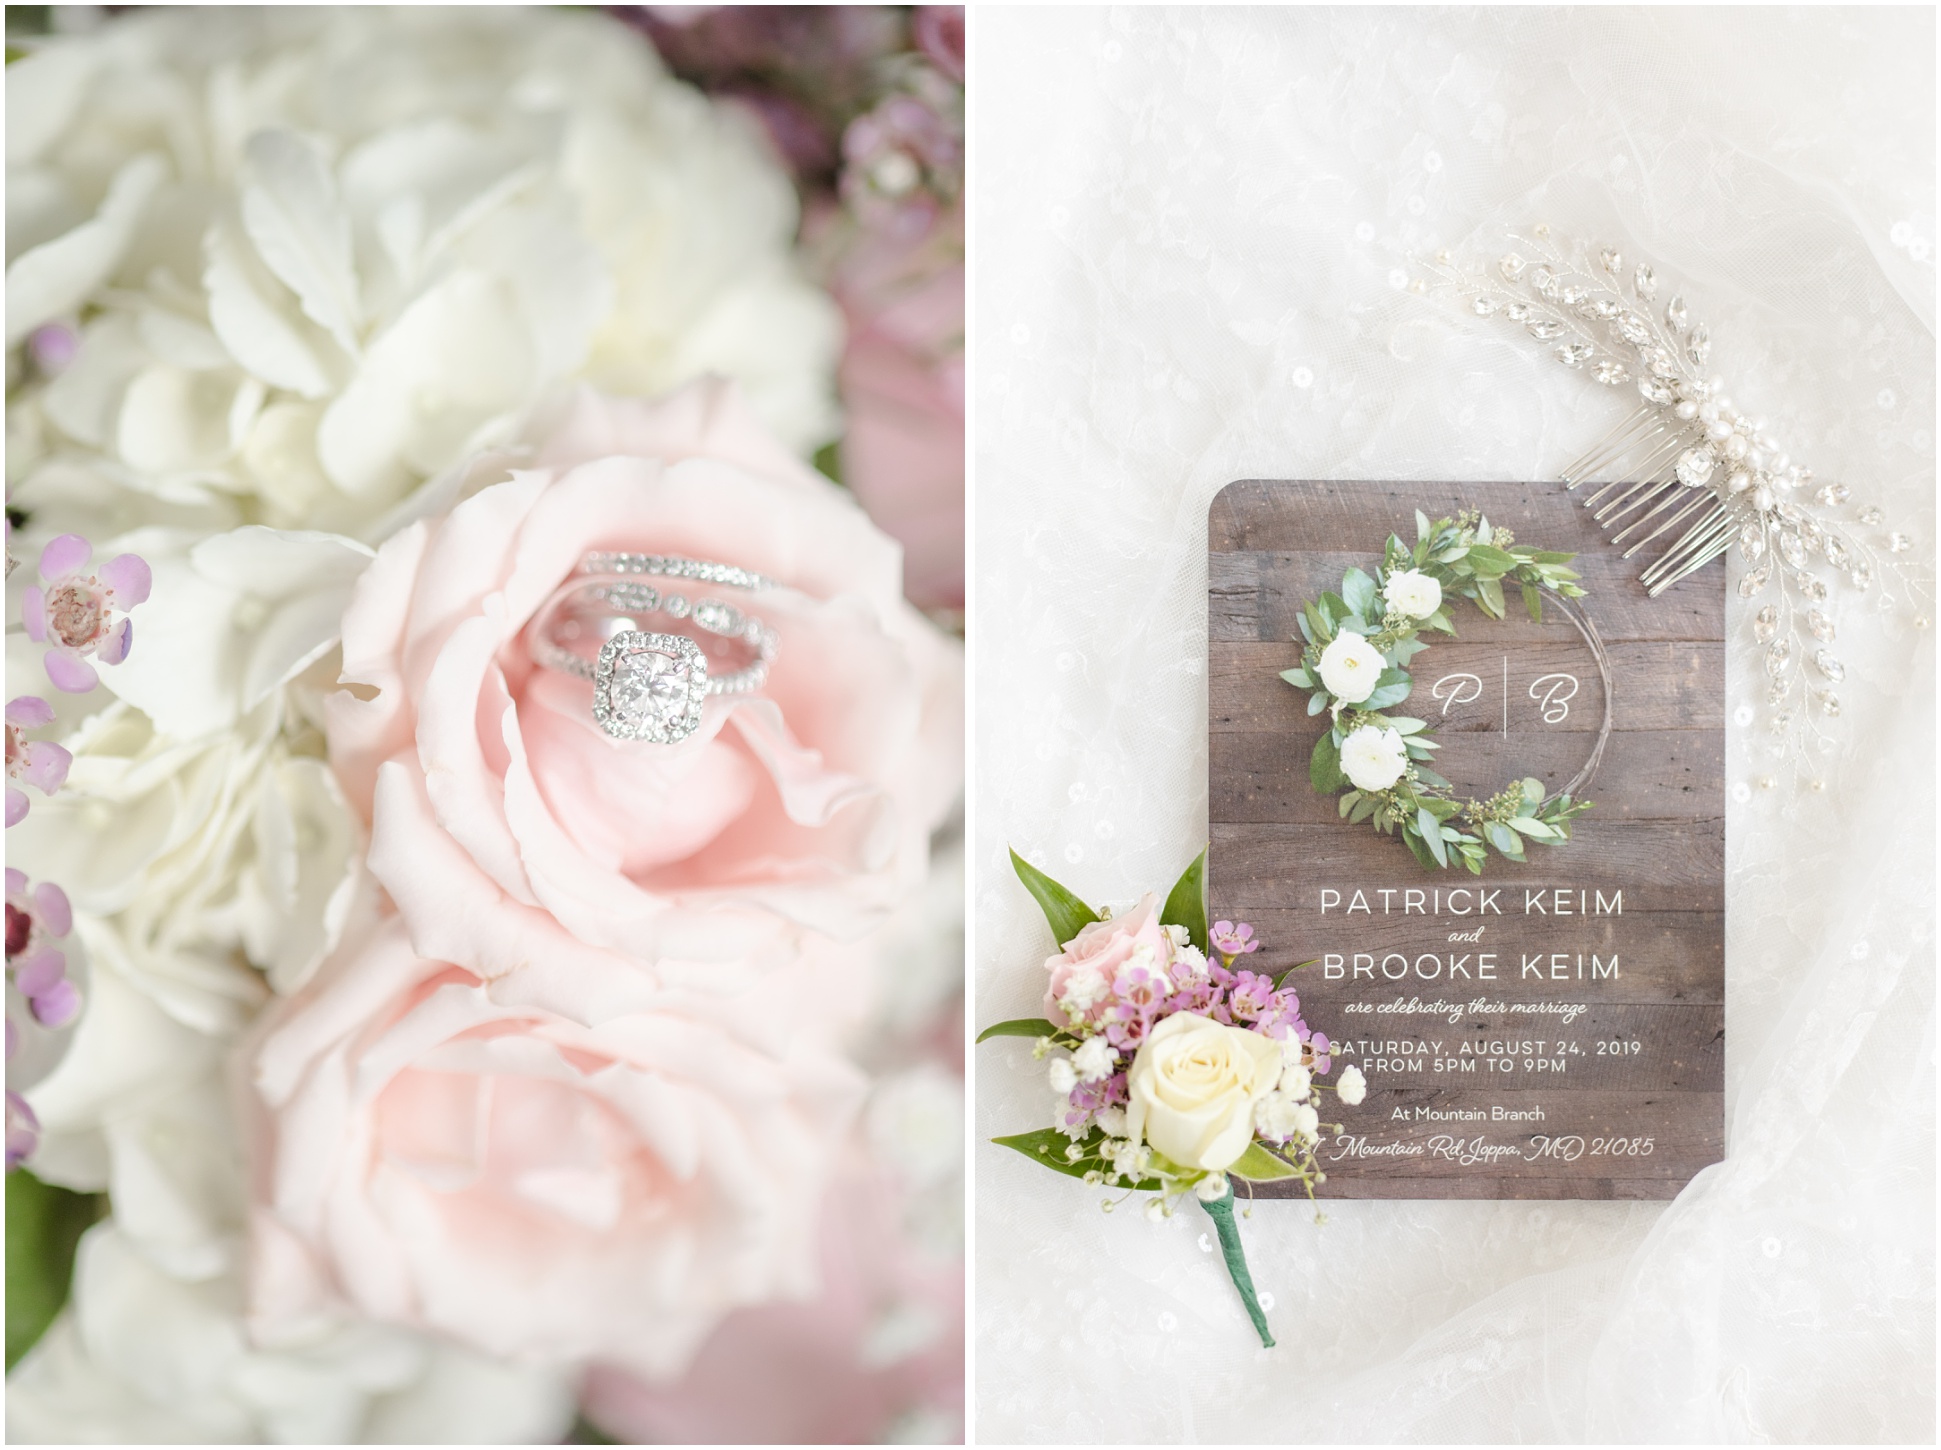 Left: diamond wedding rings in blush roses and bouquet, right: invitation and boutonniere